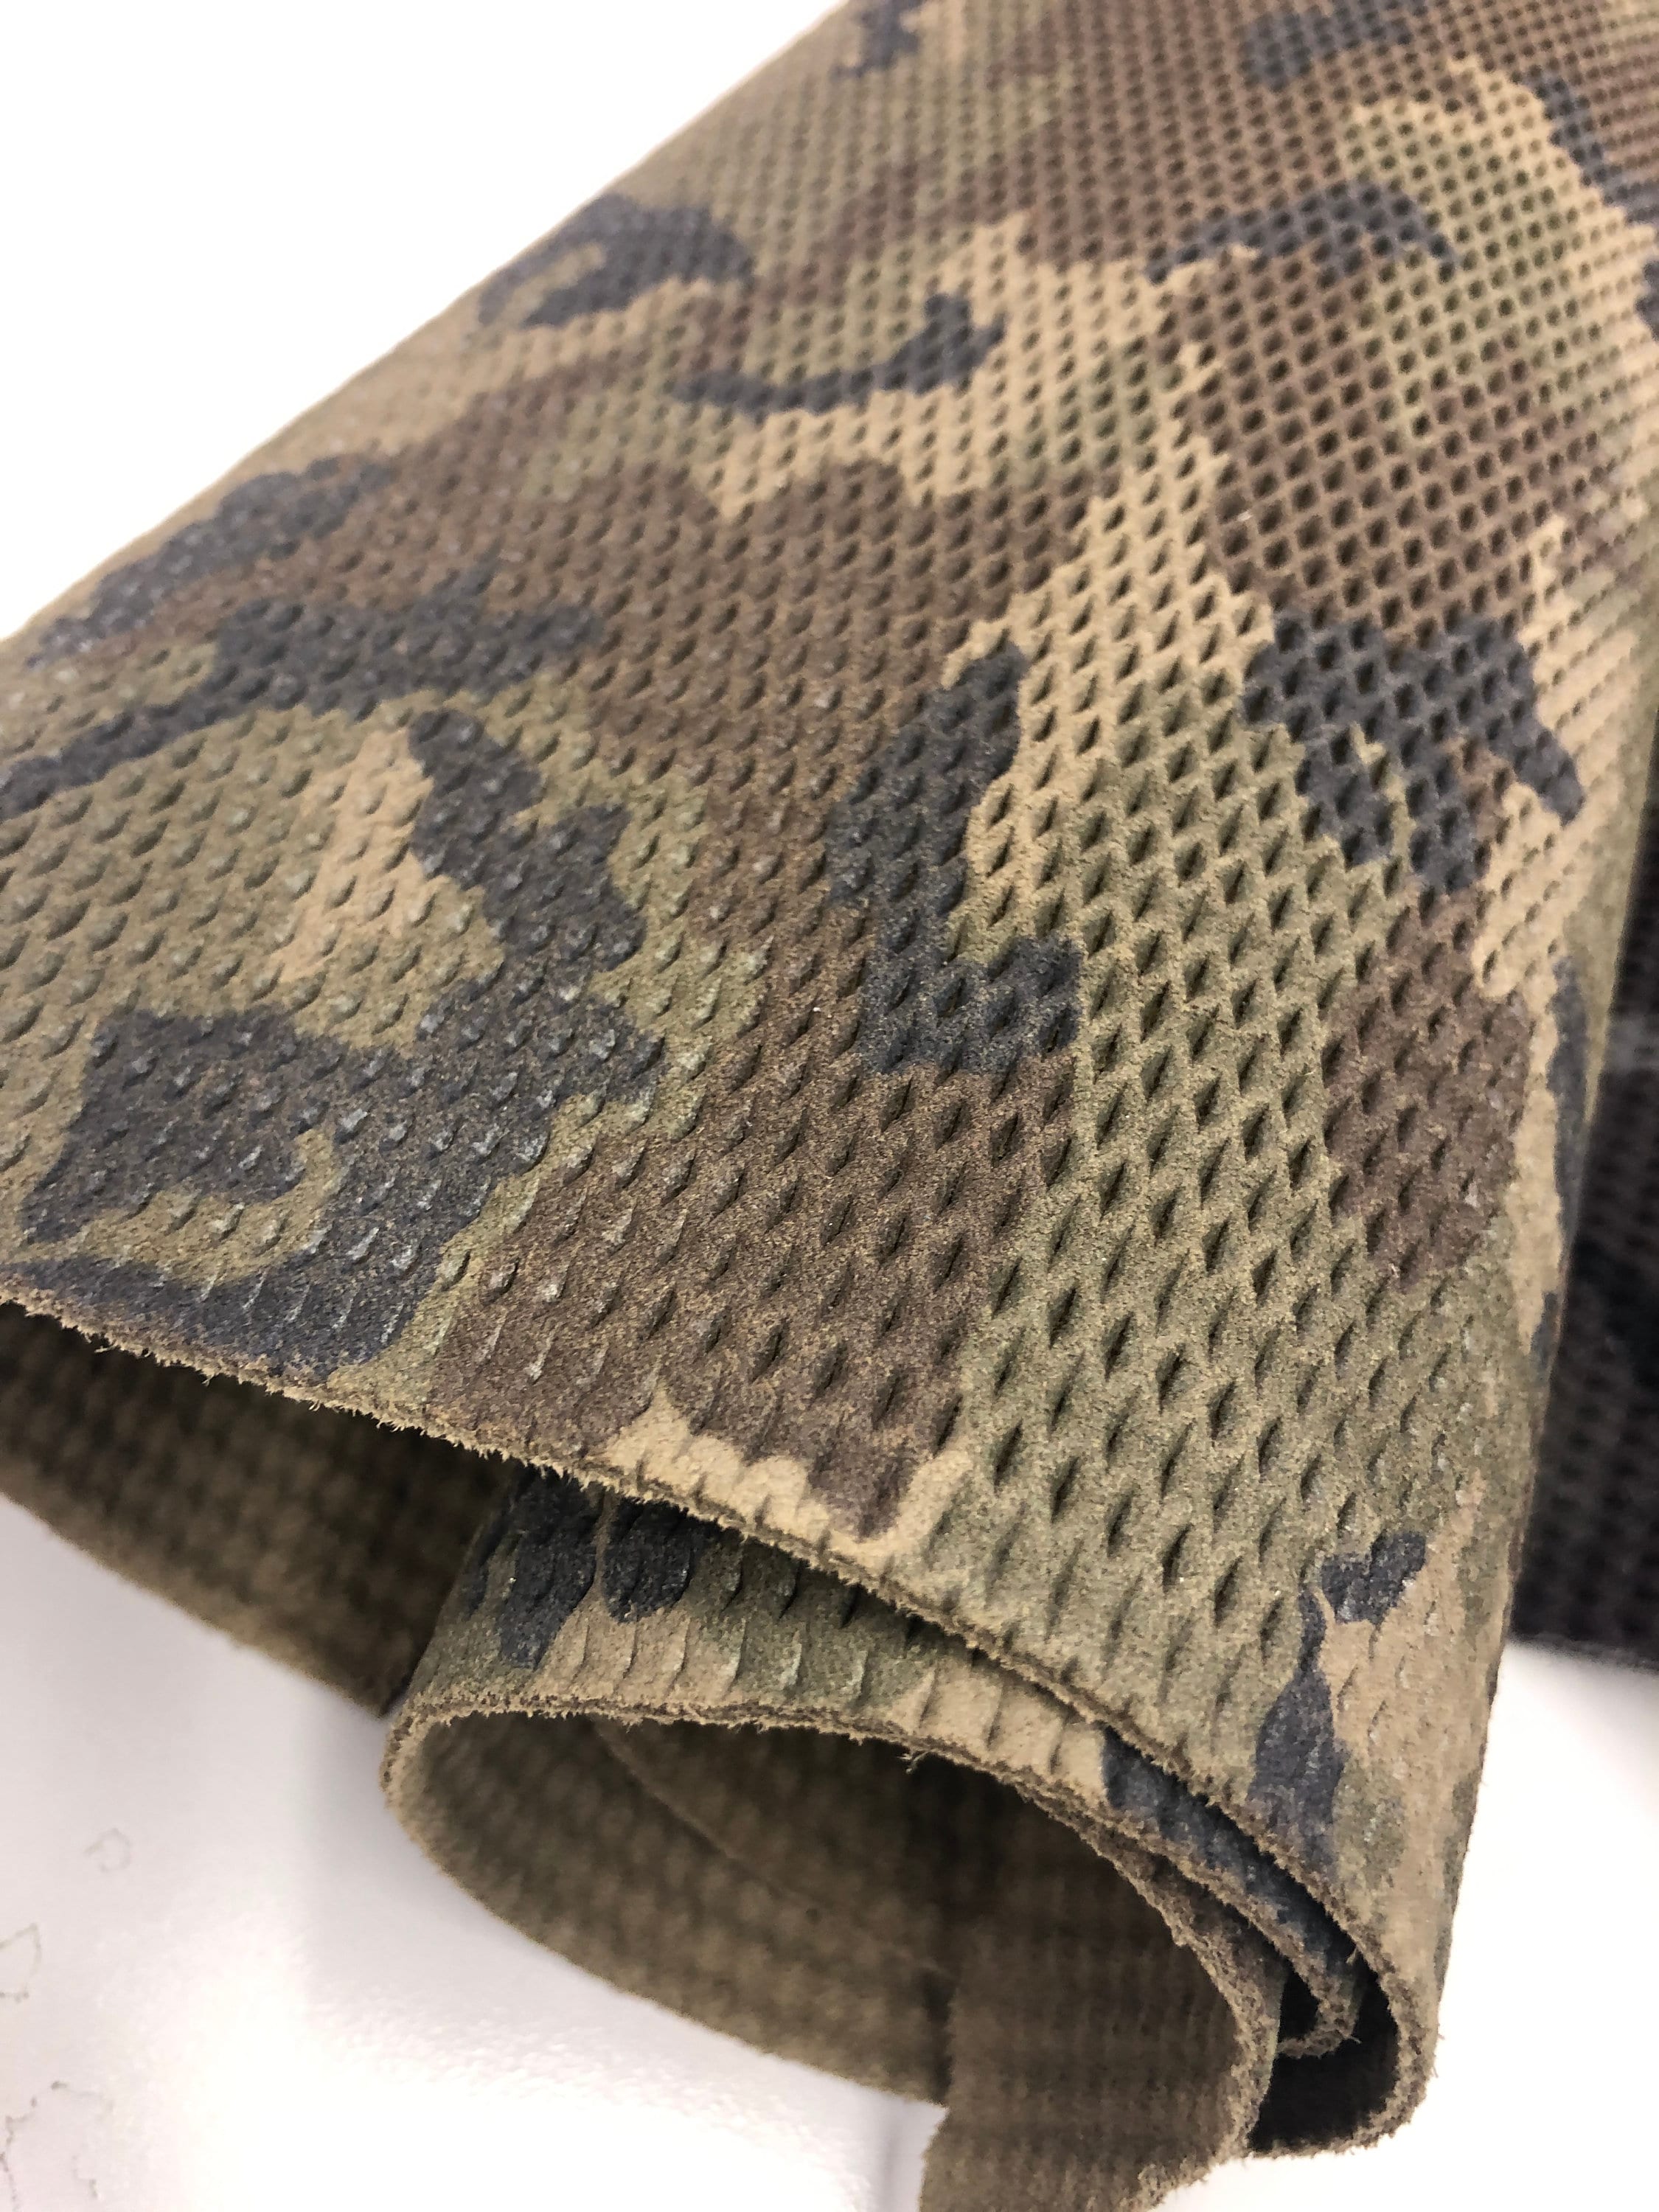 Buy LEATHER 10x10 CAMOUFLAGE Real Leather/lazer Cut Calfskin Leather Hide  Print Camo/olive, Tan or Grey,brown Combo/thickness 1.2mm Online in India 